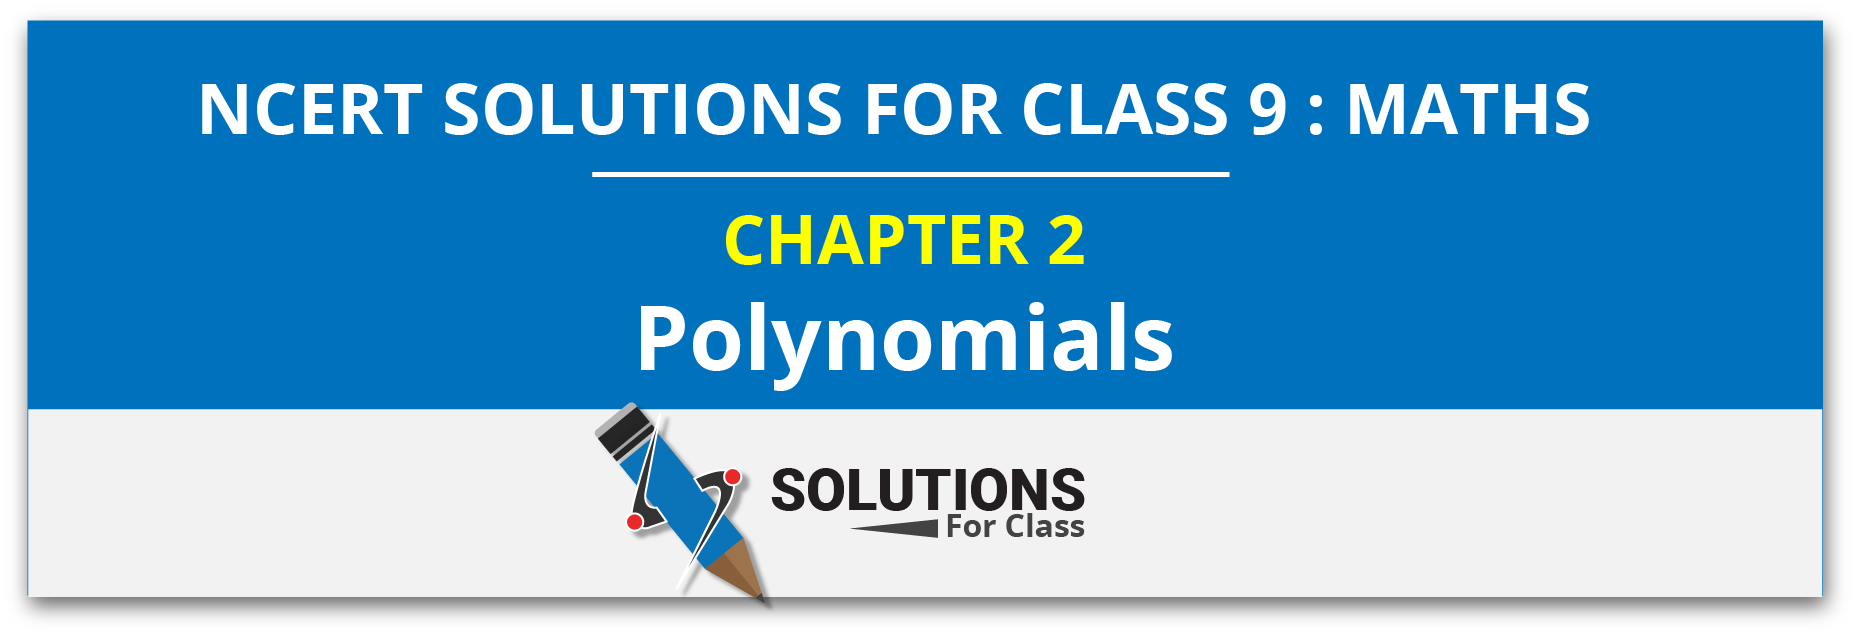 NCERT Solution For Class 9, Maths, Chapter 2, Polynomials